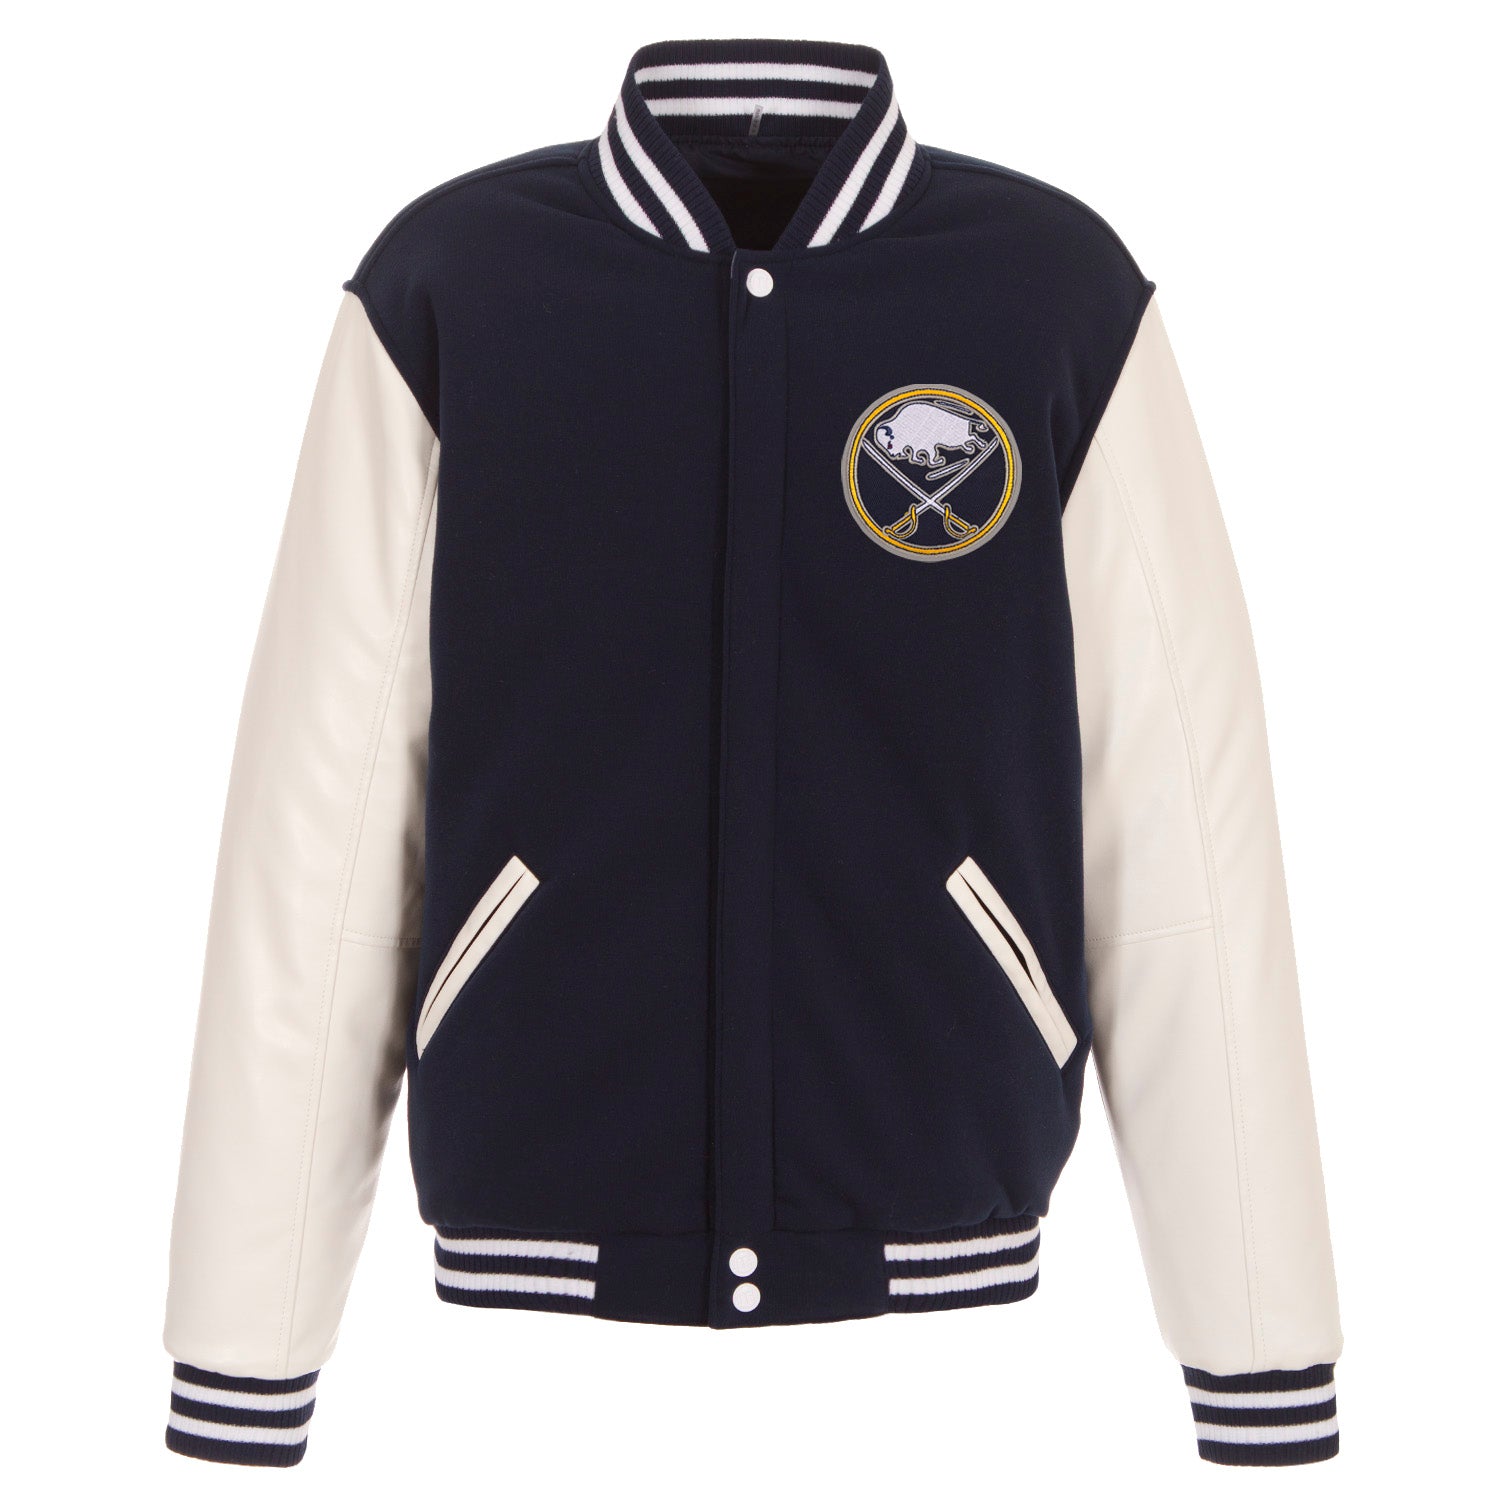 Buffalo Sabres JH Design Reversible Fleece Jacket with Faux Leather